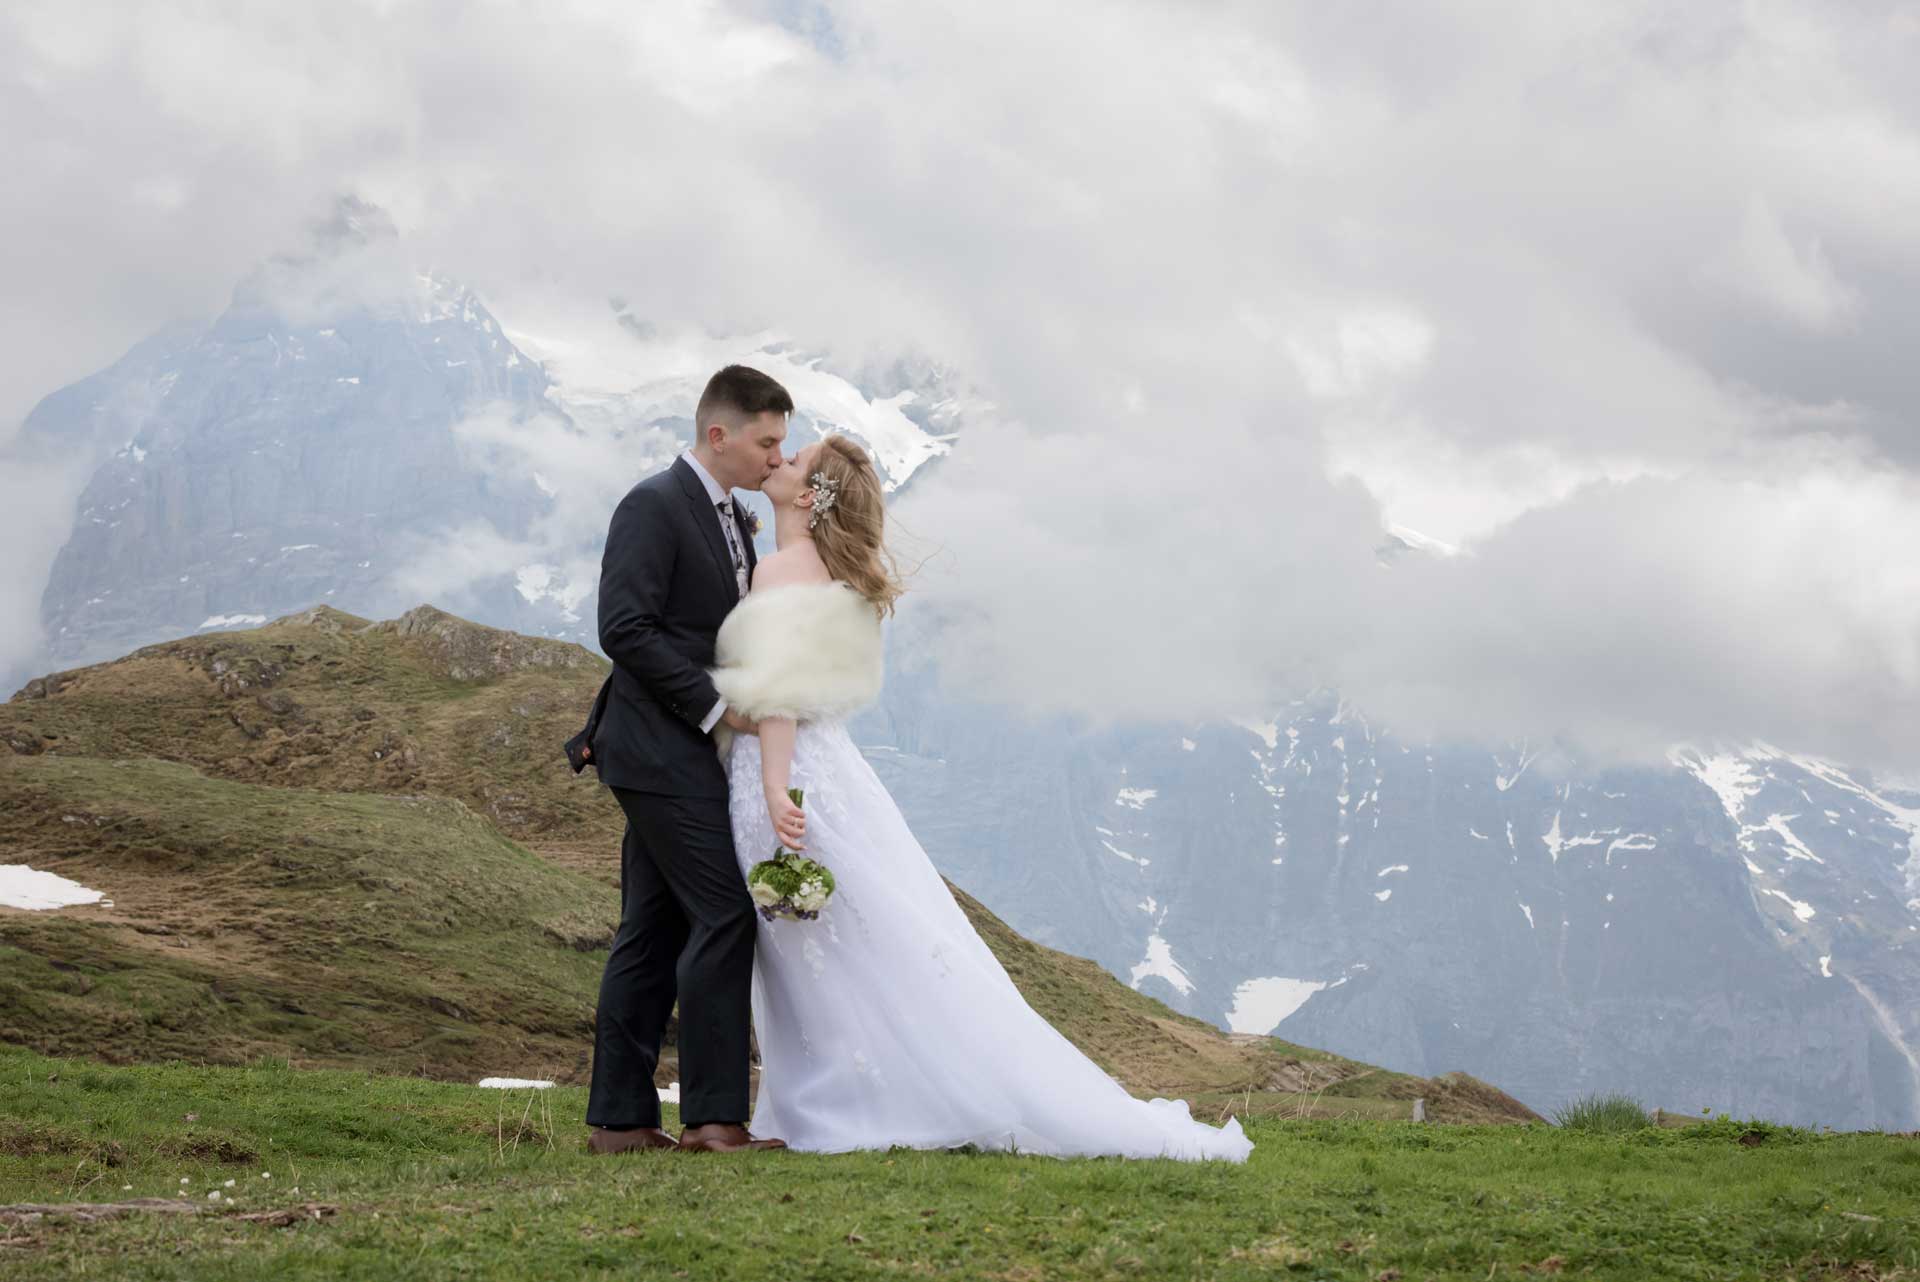 After Wedding Photo Shoot on Grindelwald First